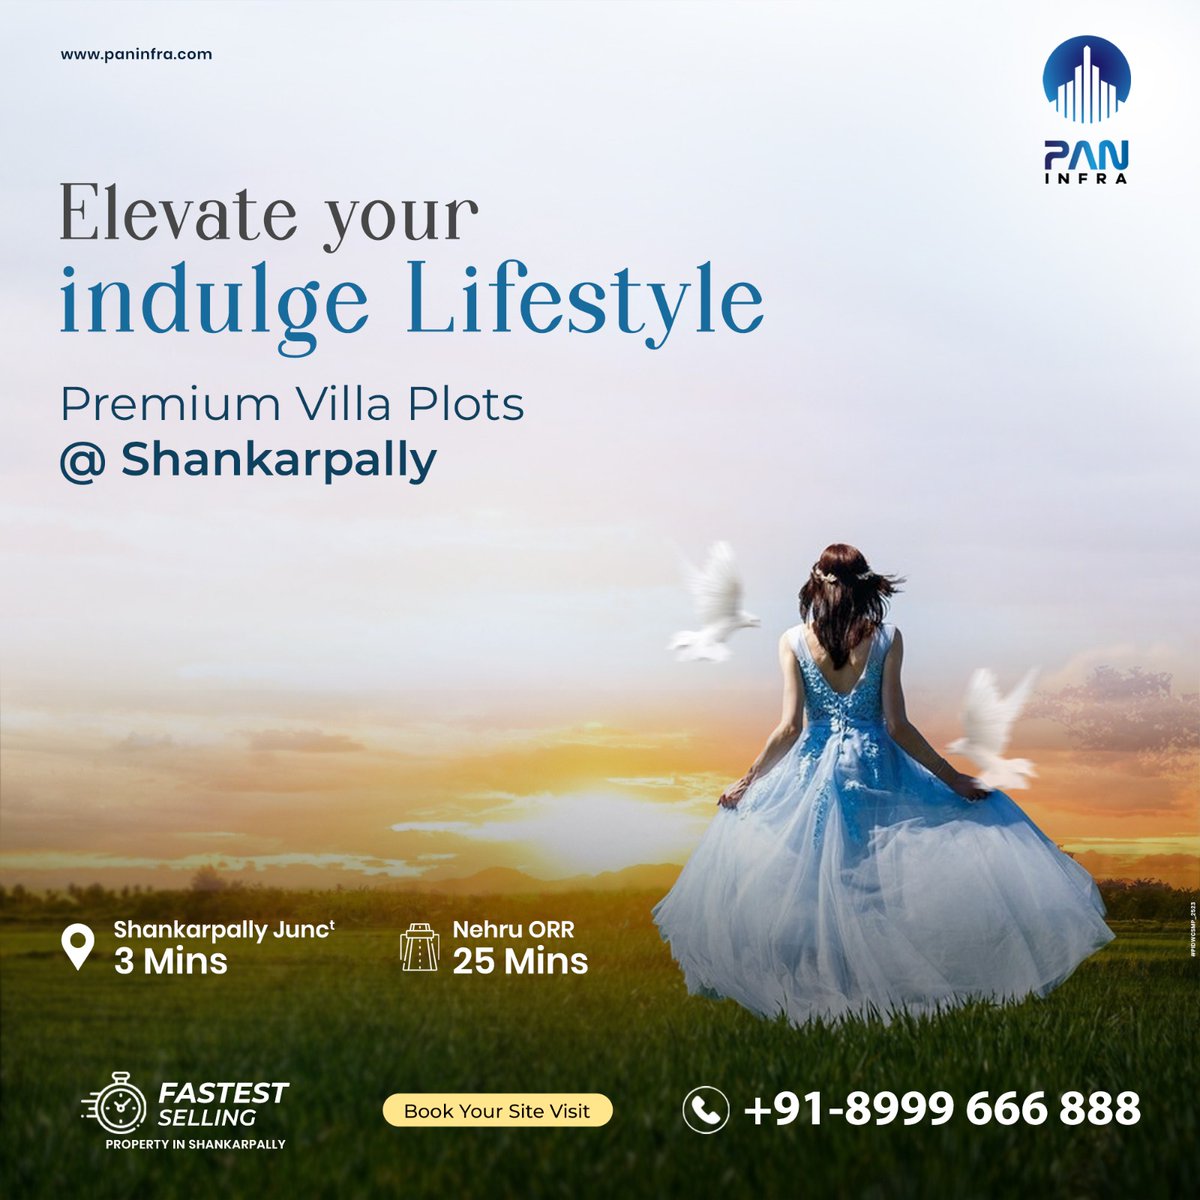 Looking to build your dream home in Shankarpally?
Pan Western County luxurious villa plots are the perfect solution. 

💰Book now - 8999666888

#PANINFRA #DreamHome #LuxuryLiving #PlotsforsaleinShankarpally #GatedCommunityPlots